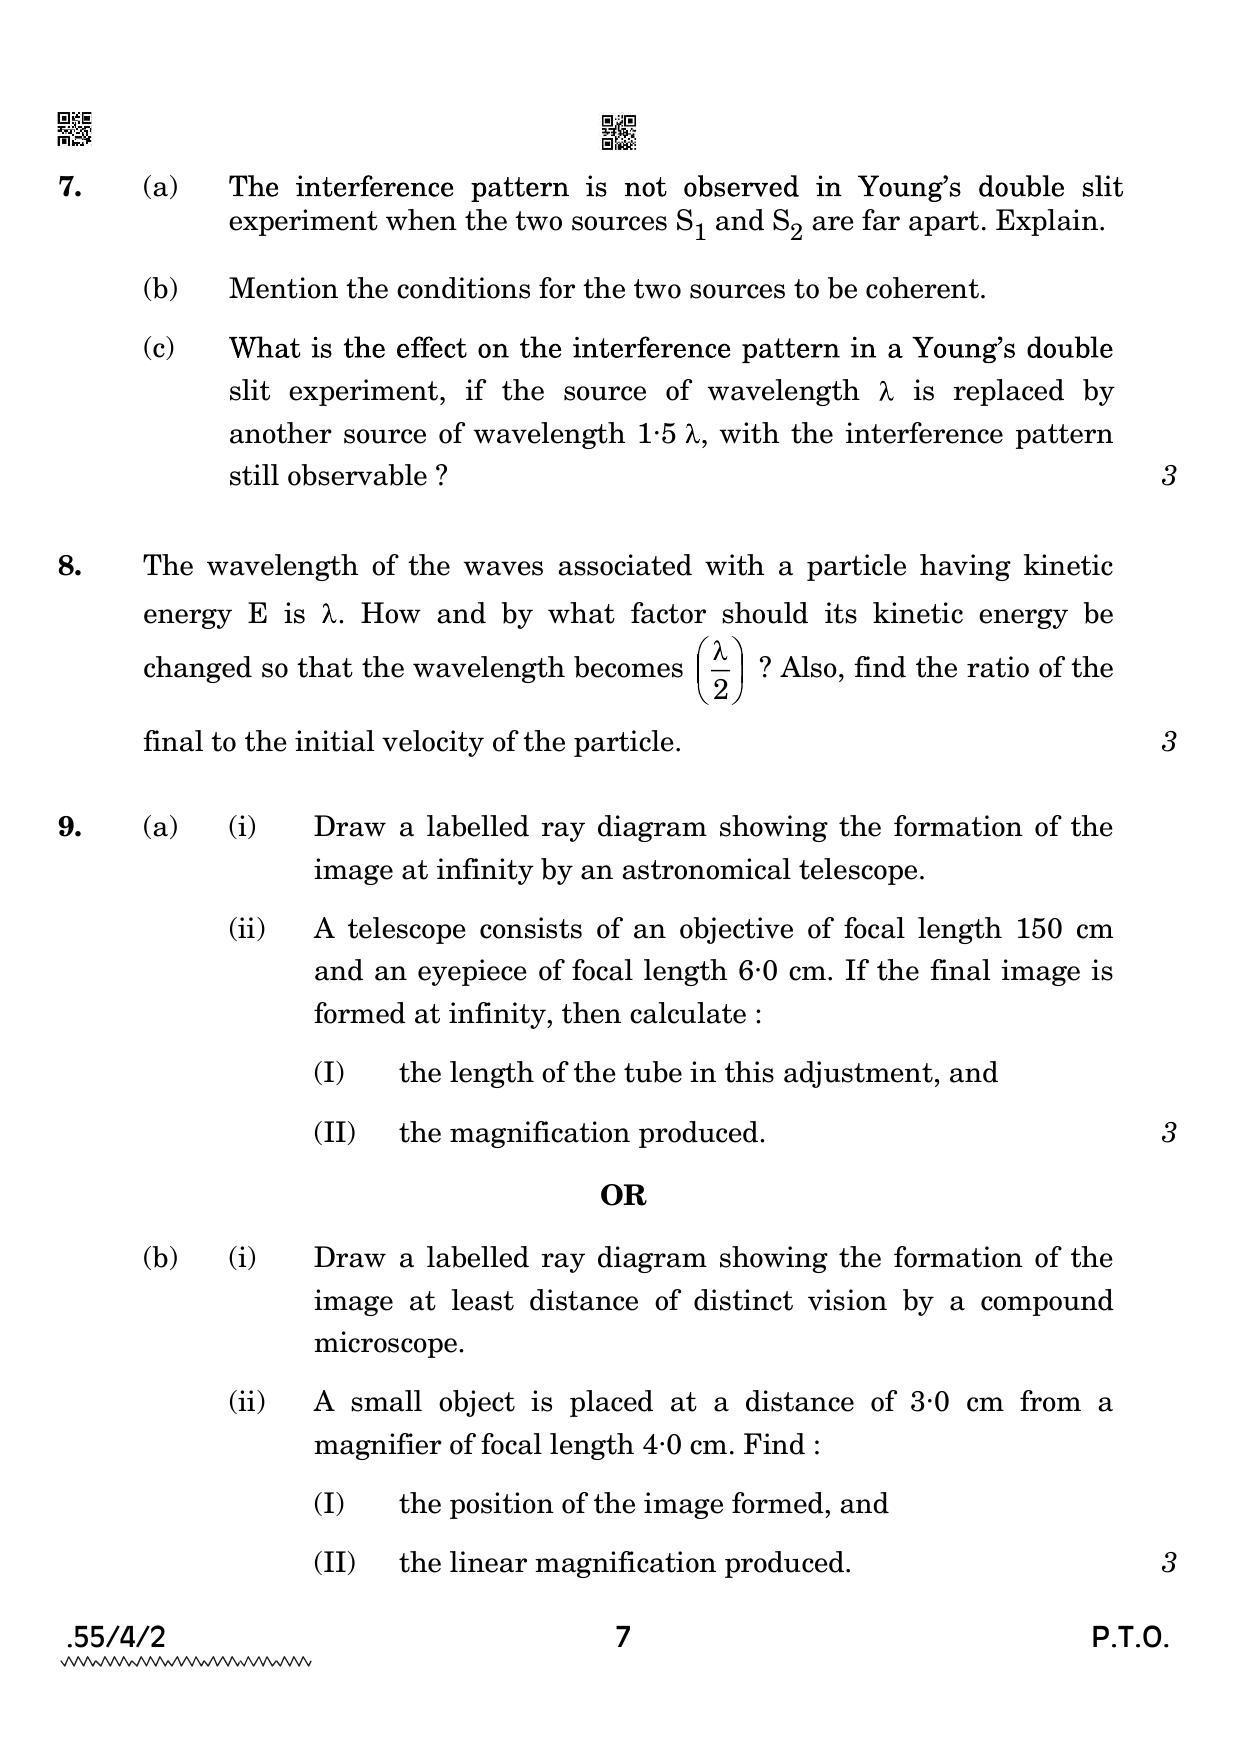 CBSE Class 12 55-4-2 Physics 2022 Question Paper - Page 7